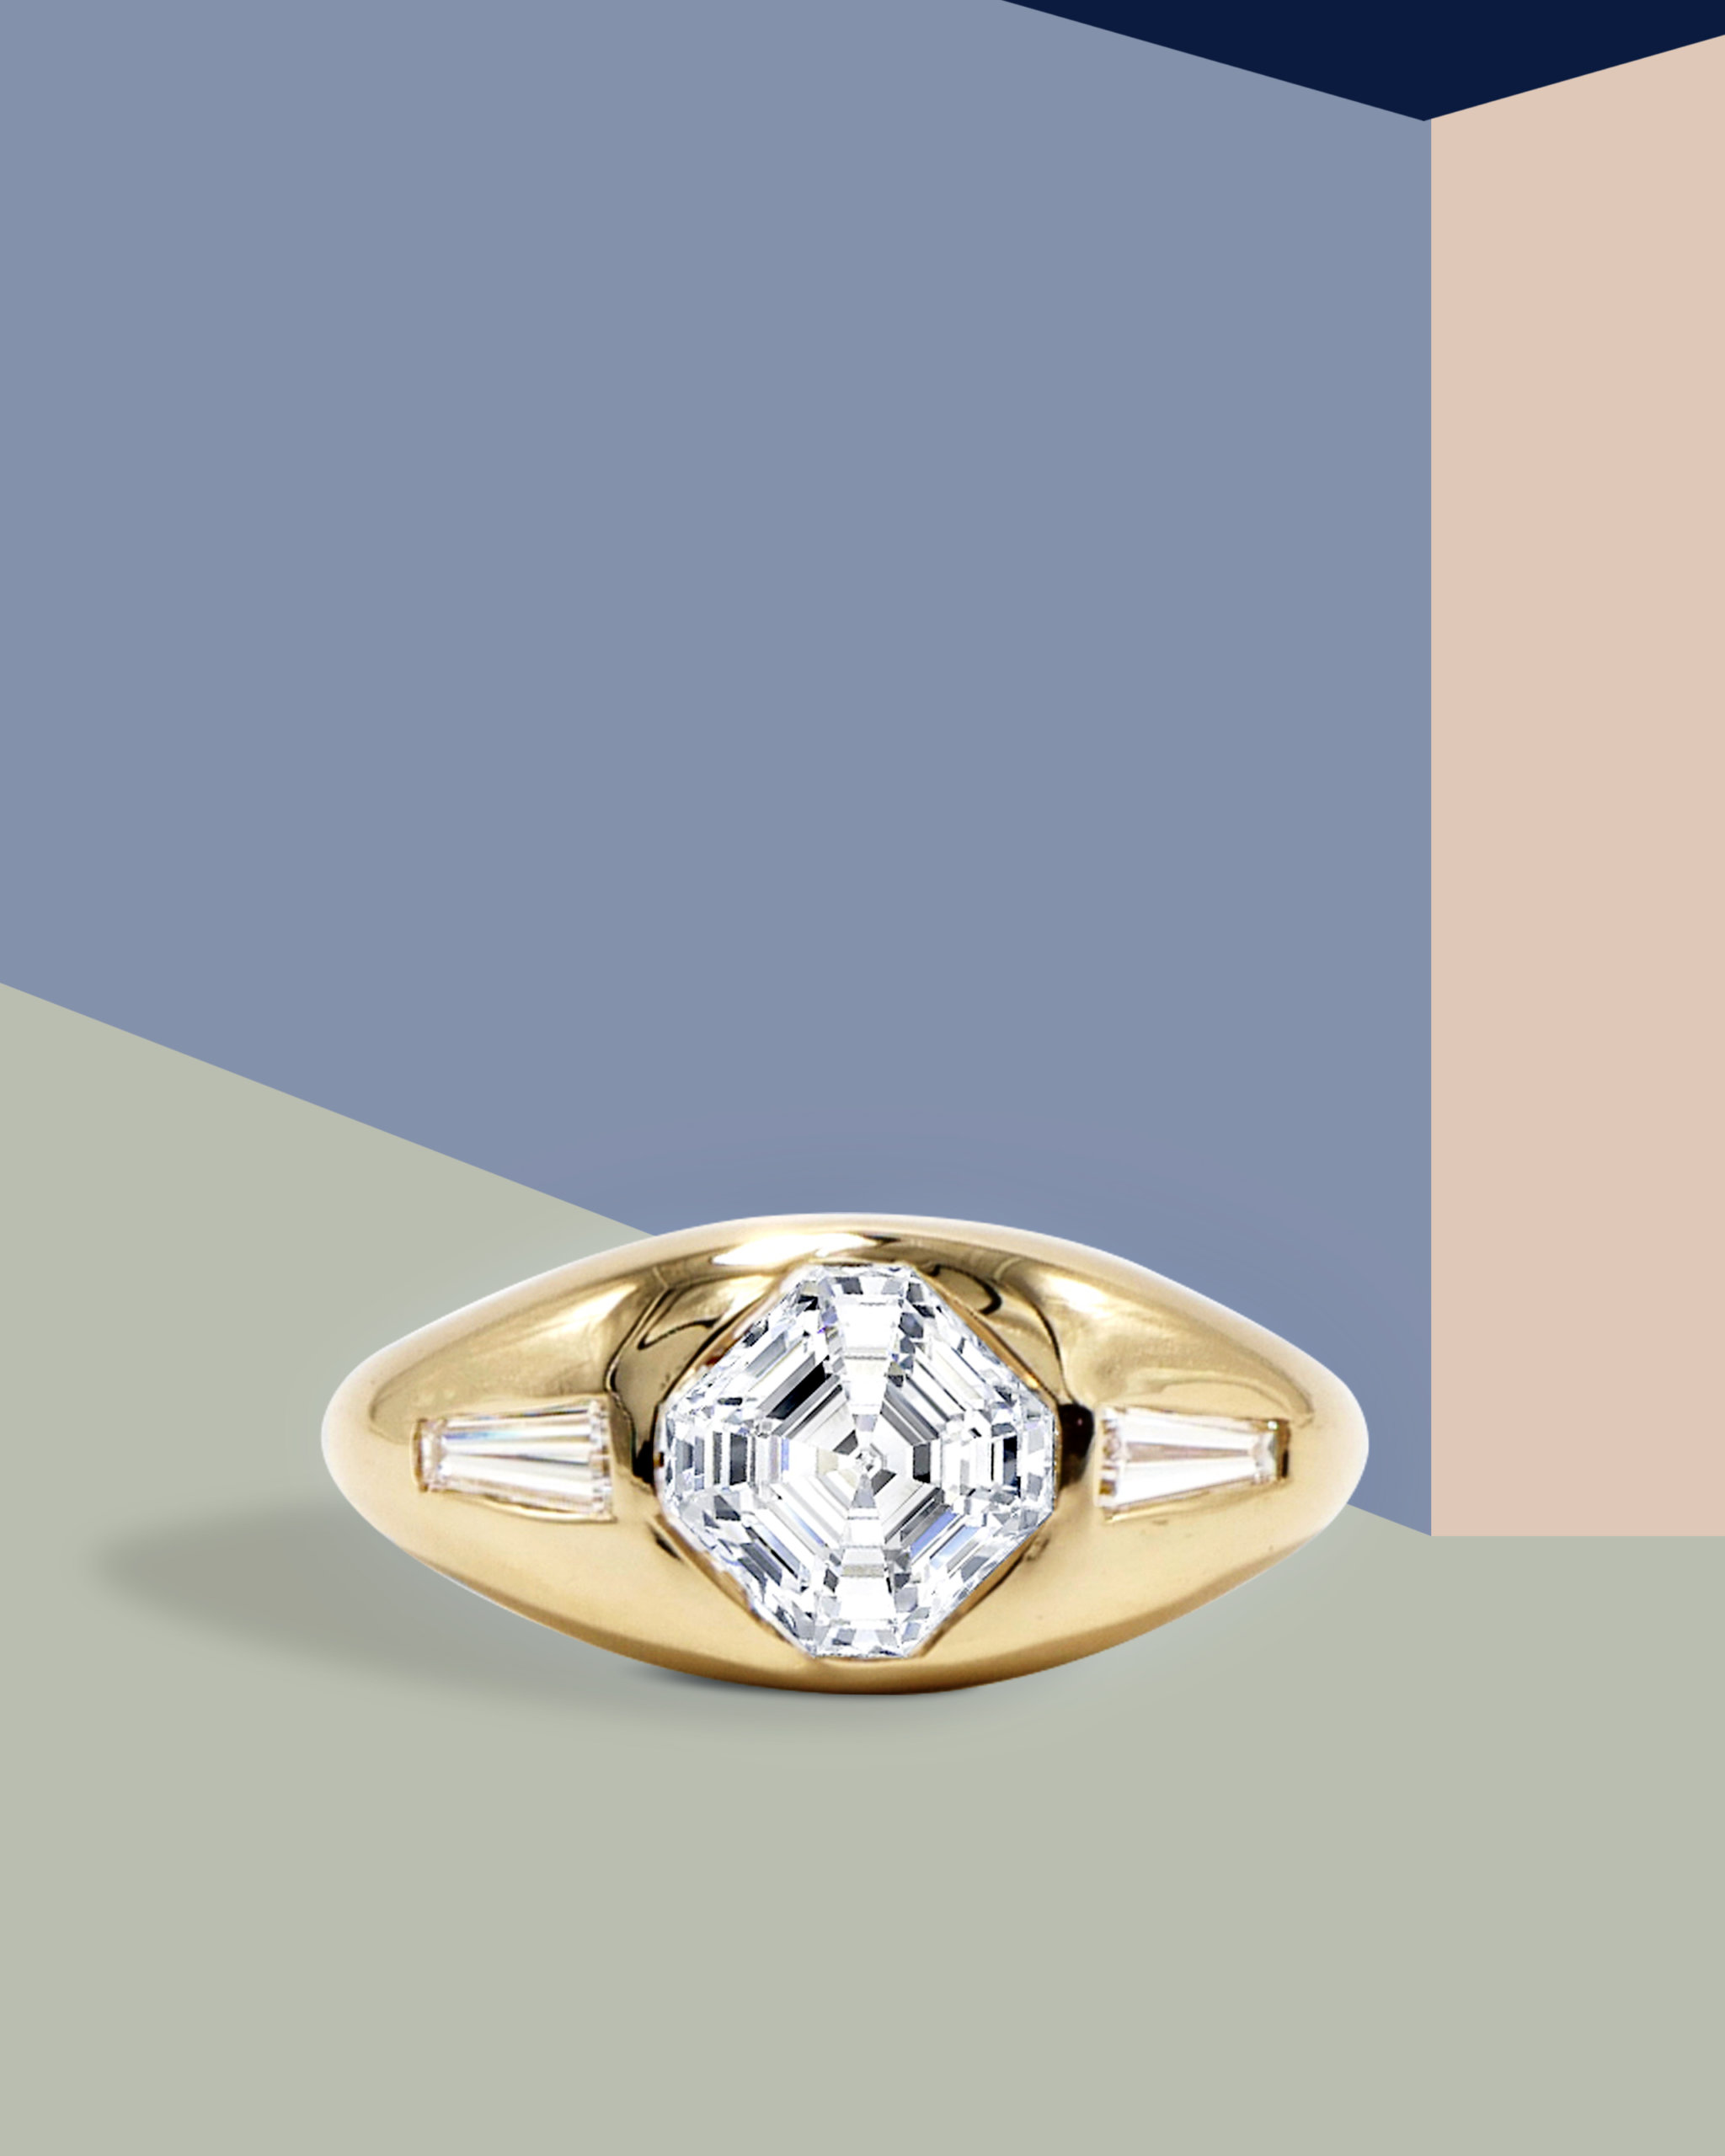 Dome-shaped gypsy engagement ring in yellow gold with a center Asscher cut diamond and two side baguette diamonds